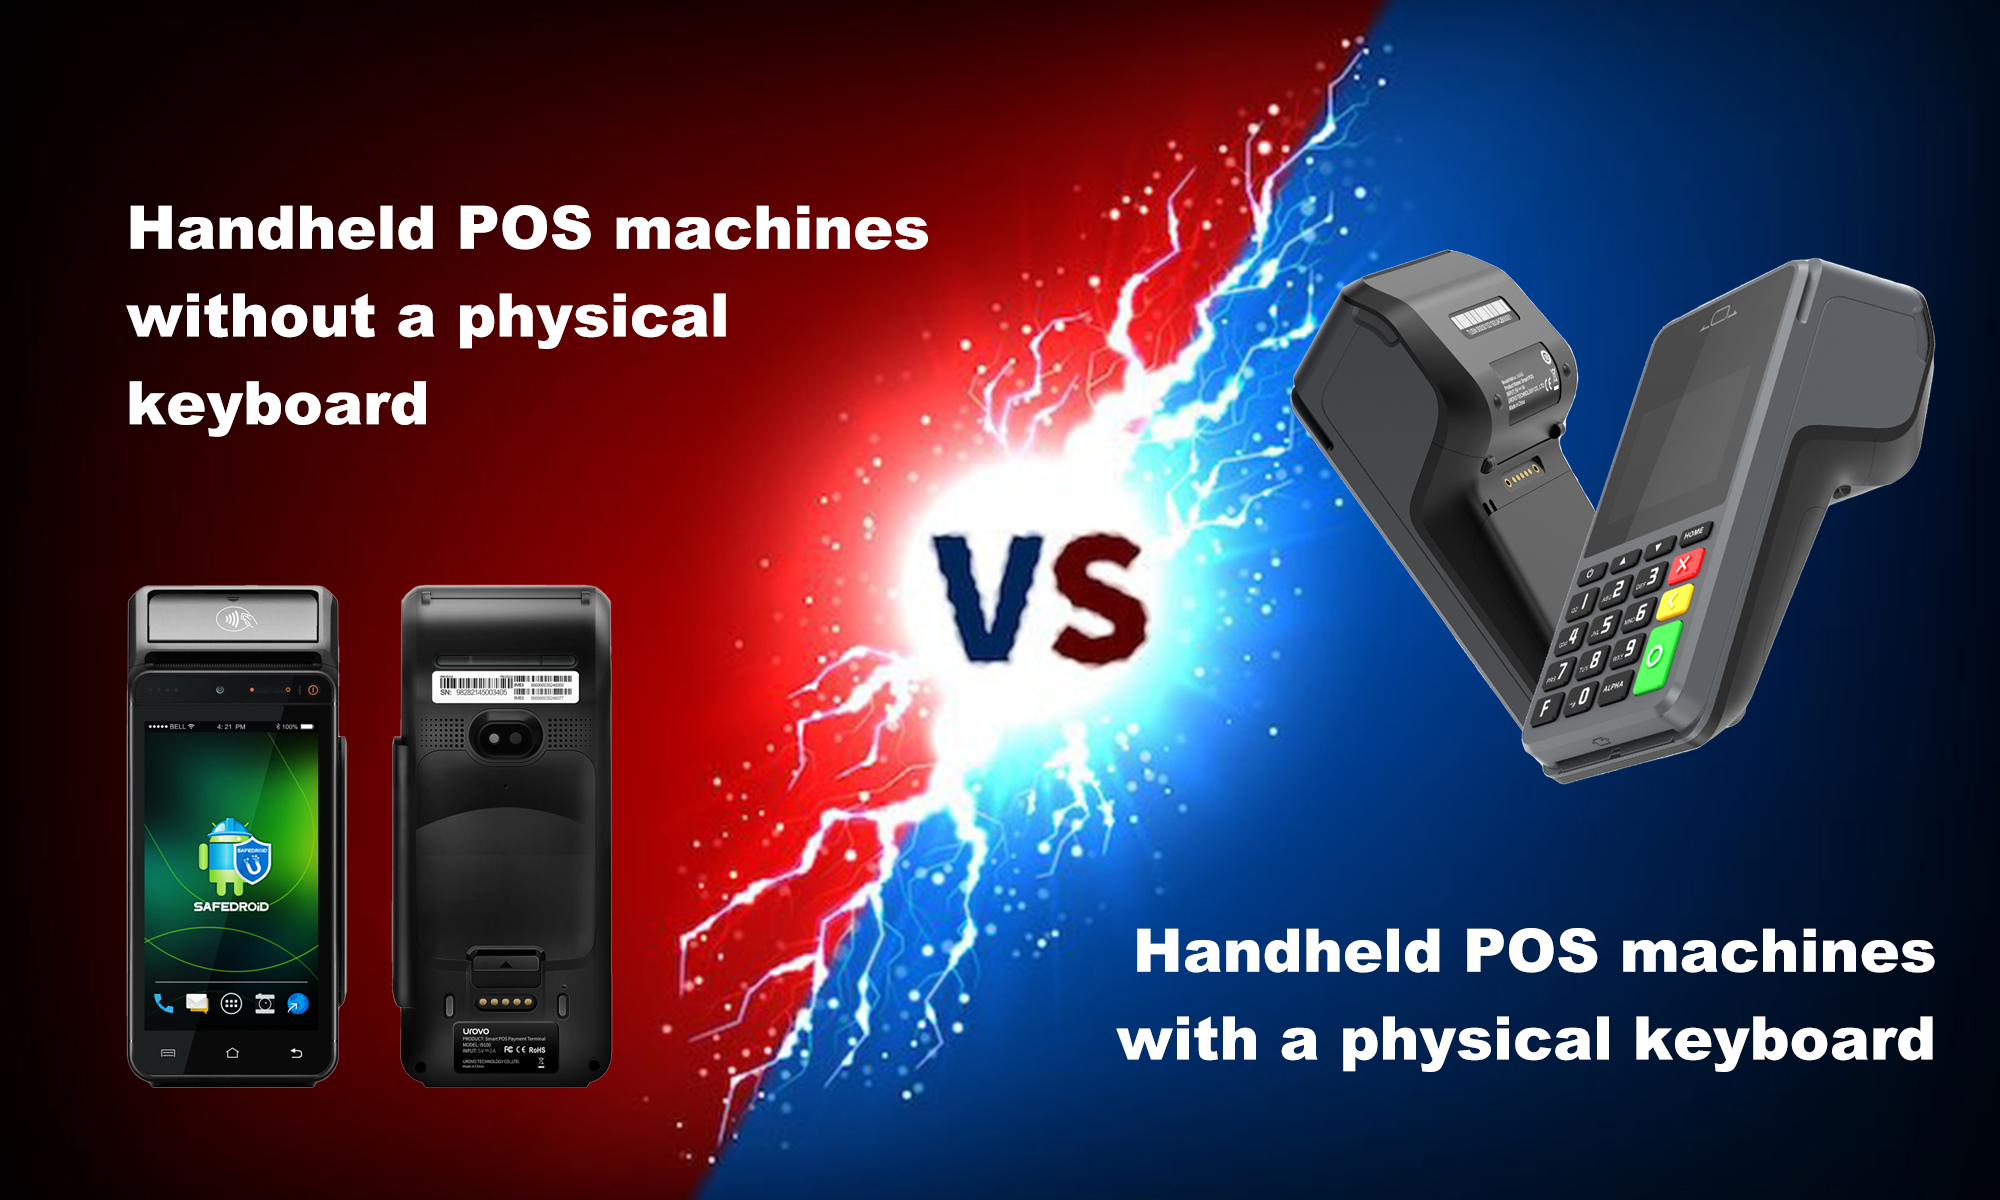 The difference between handheld POS machine with and without physical keyboard